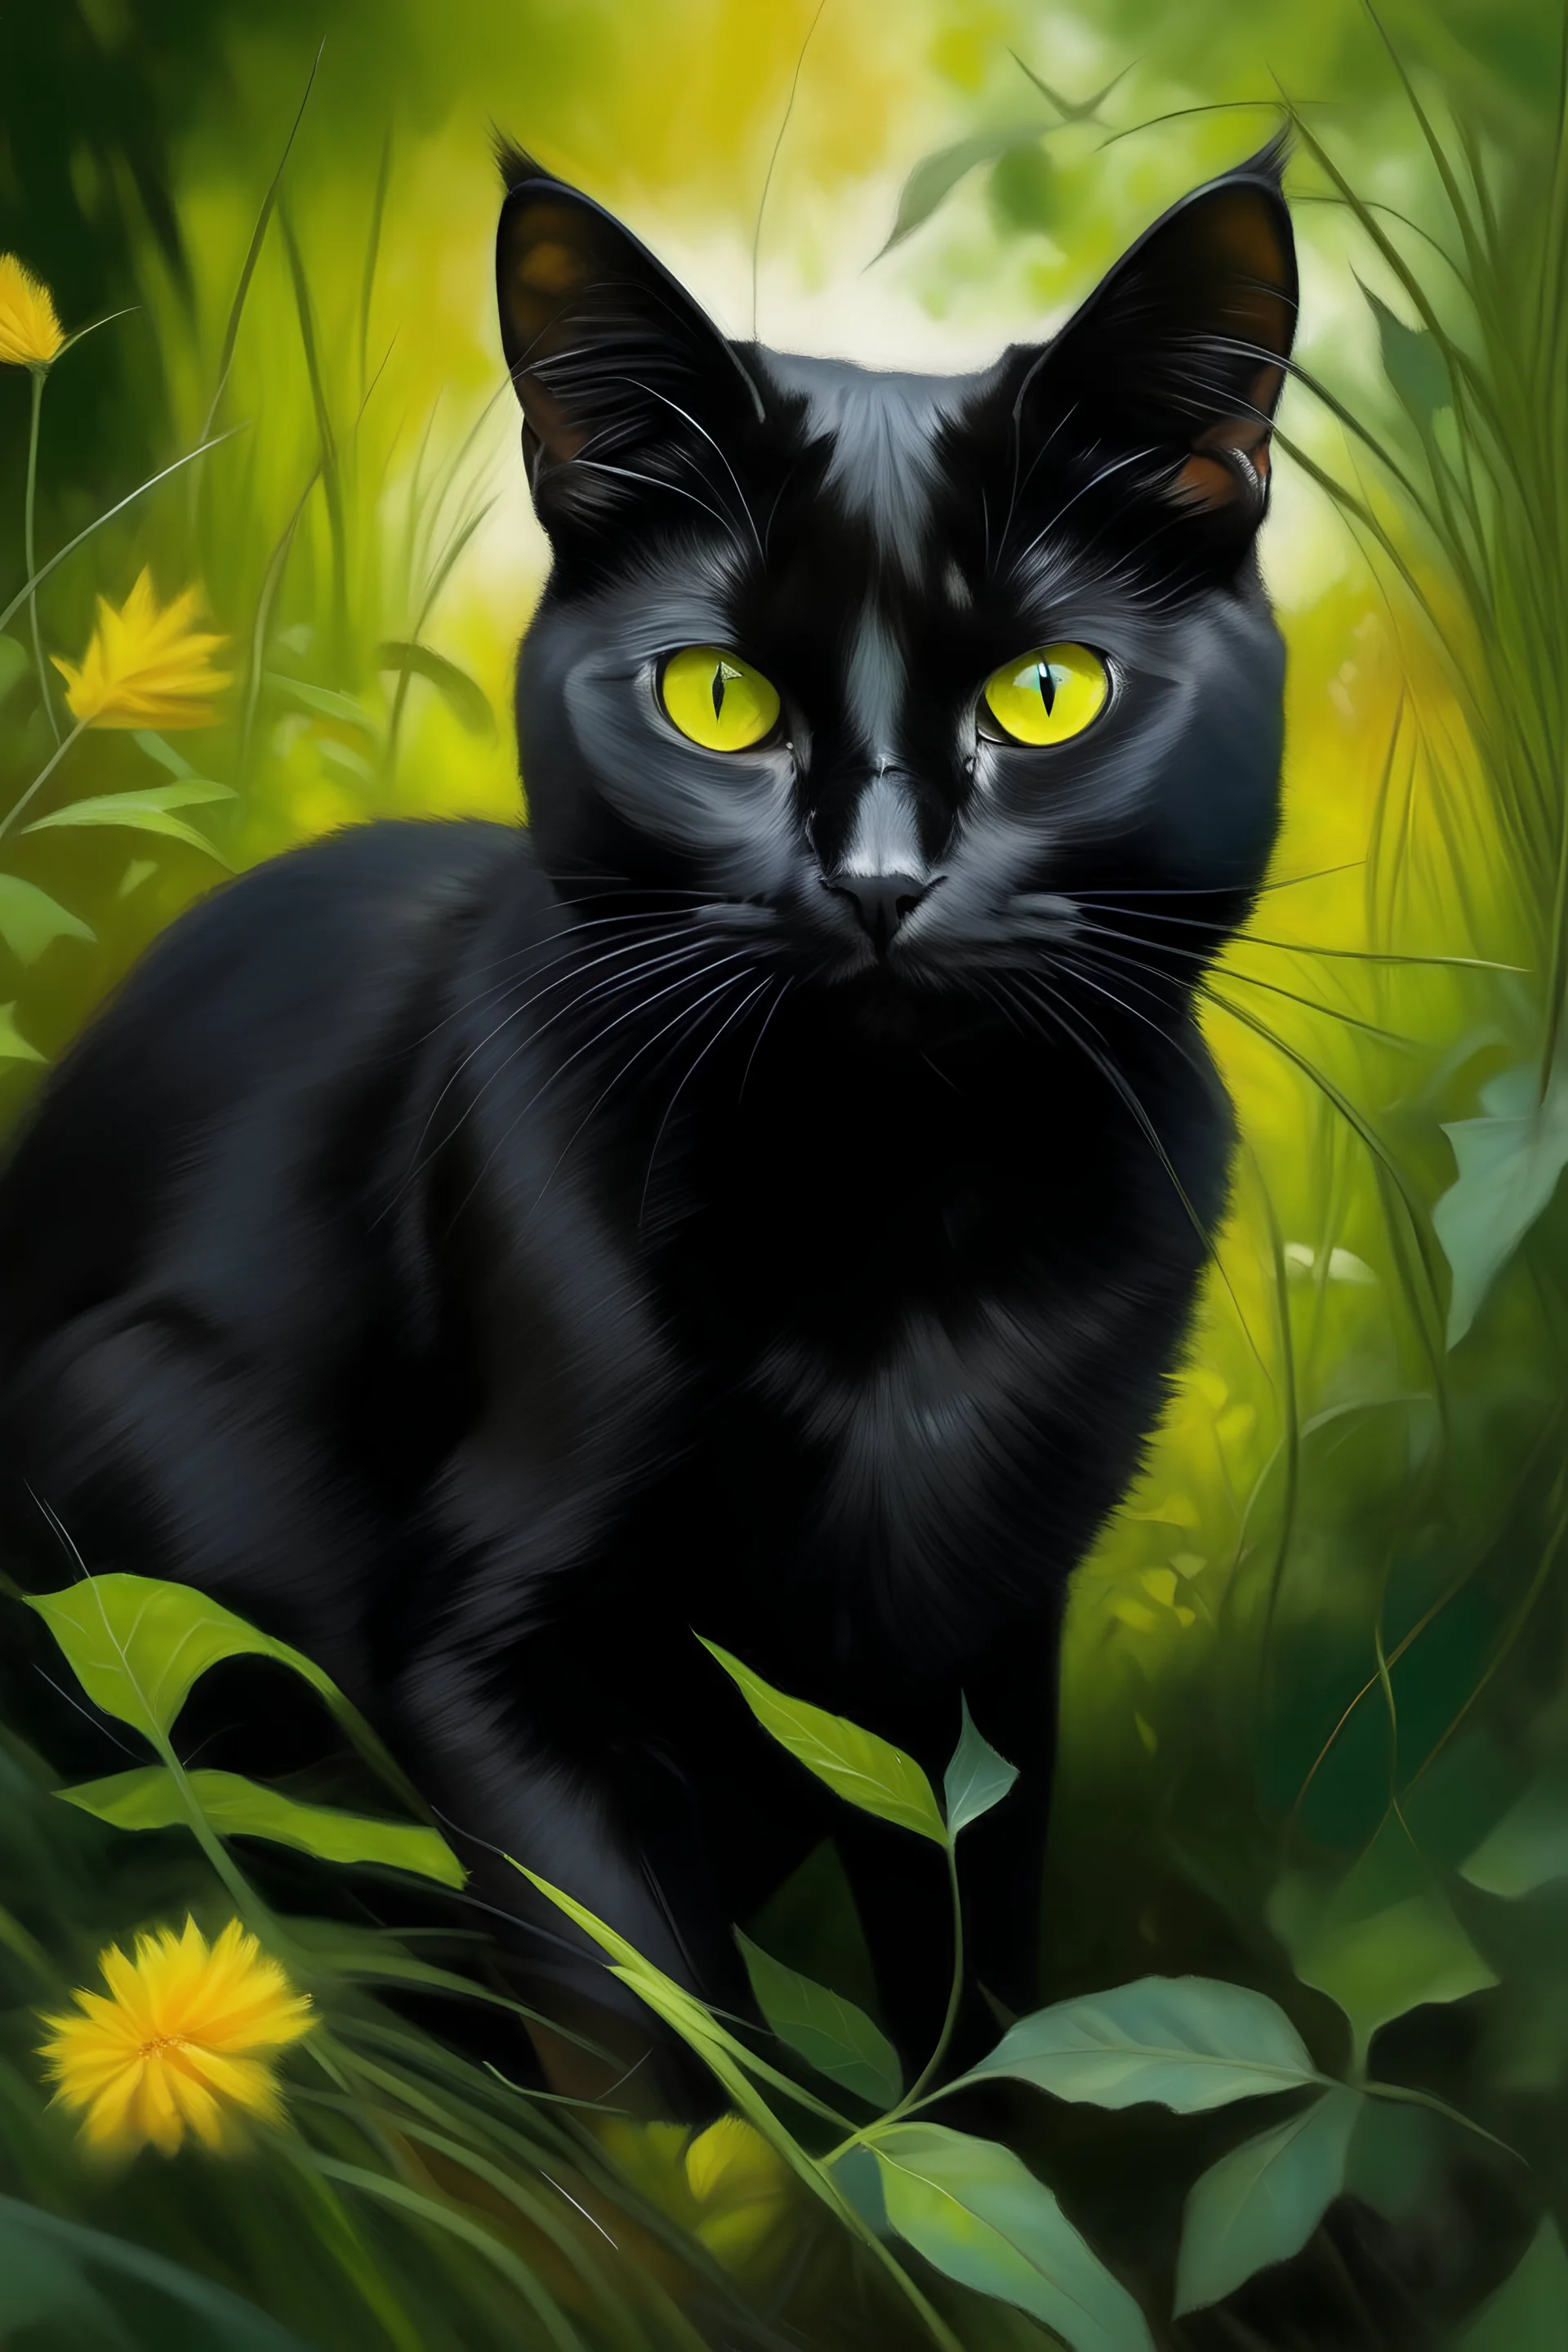 A realistic painting of a black cat with yellow eyes sitting in the bushes